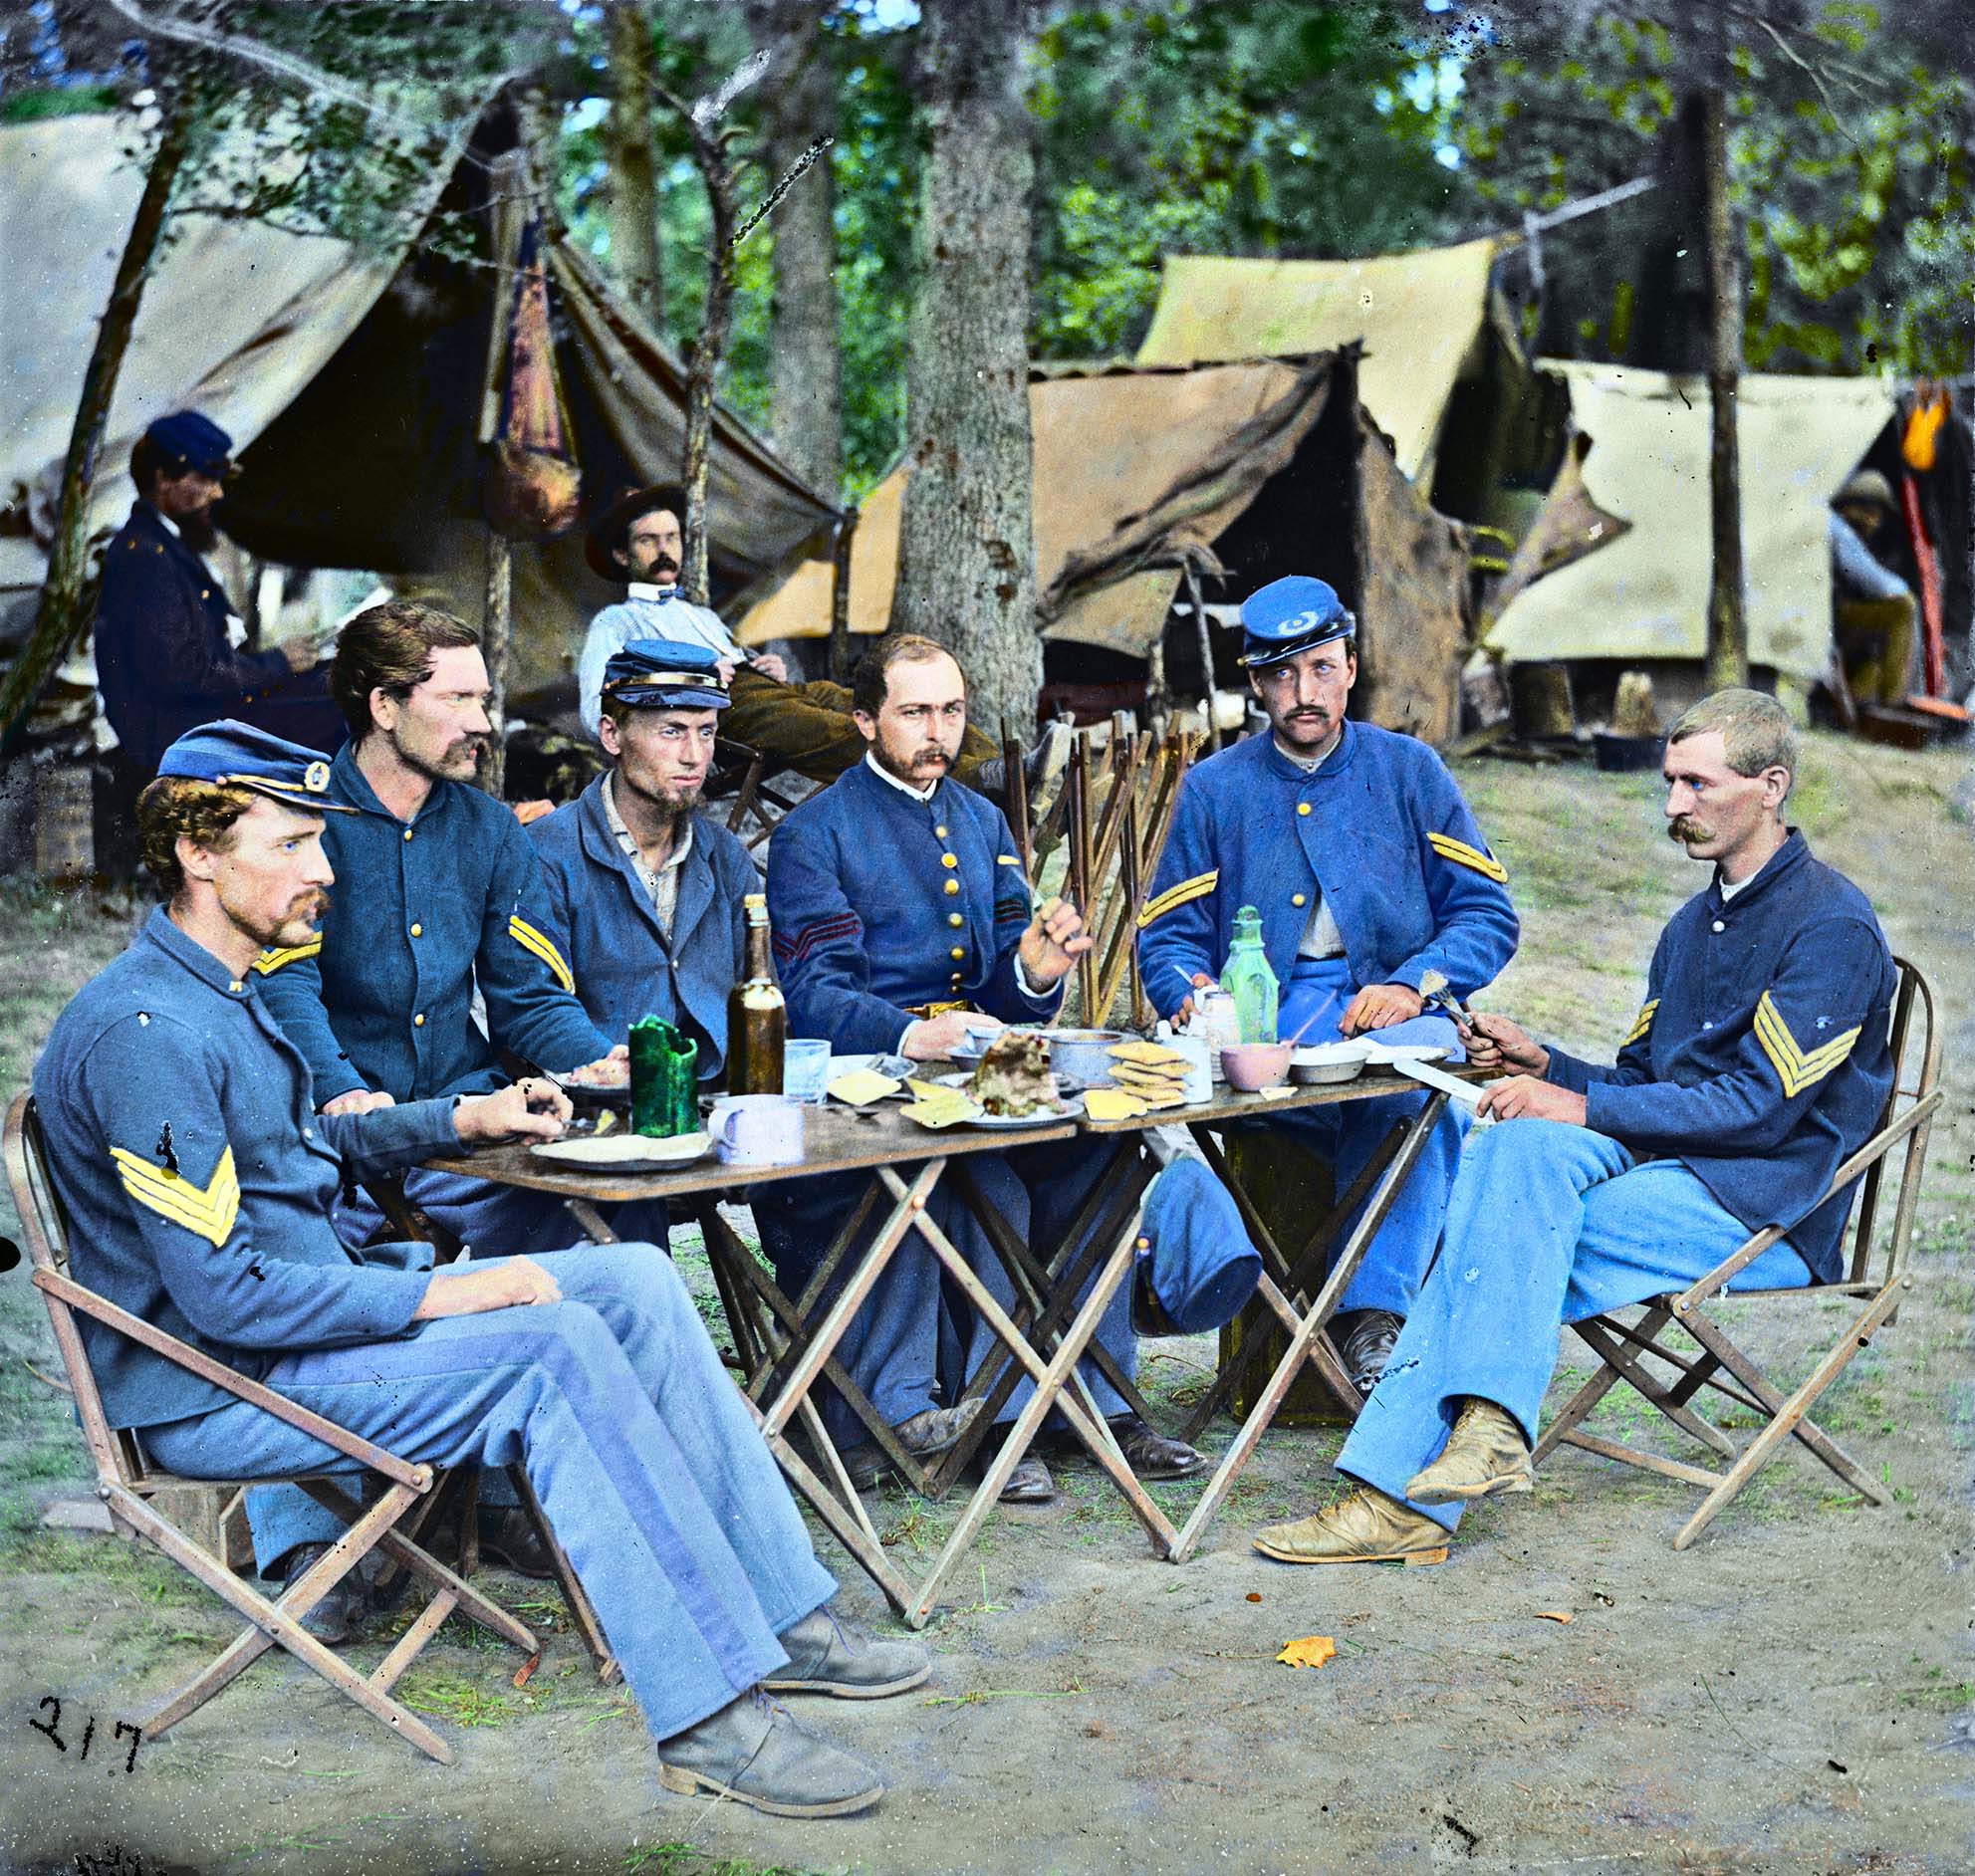 NCOs of Company D, 93rd Infantry, New York. Photograph from the main eastern theater of war, Meade in Virginia, August-November 1863.

Colorized with GIMP software. I never noticed the leaf or little blades of grass until I had to colorize them. One gentleman (second from right) has a cut on his finger.  Also, I made everyone's suit is a different color blue. Hope you enjoy.